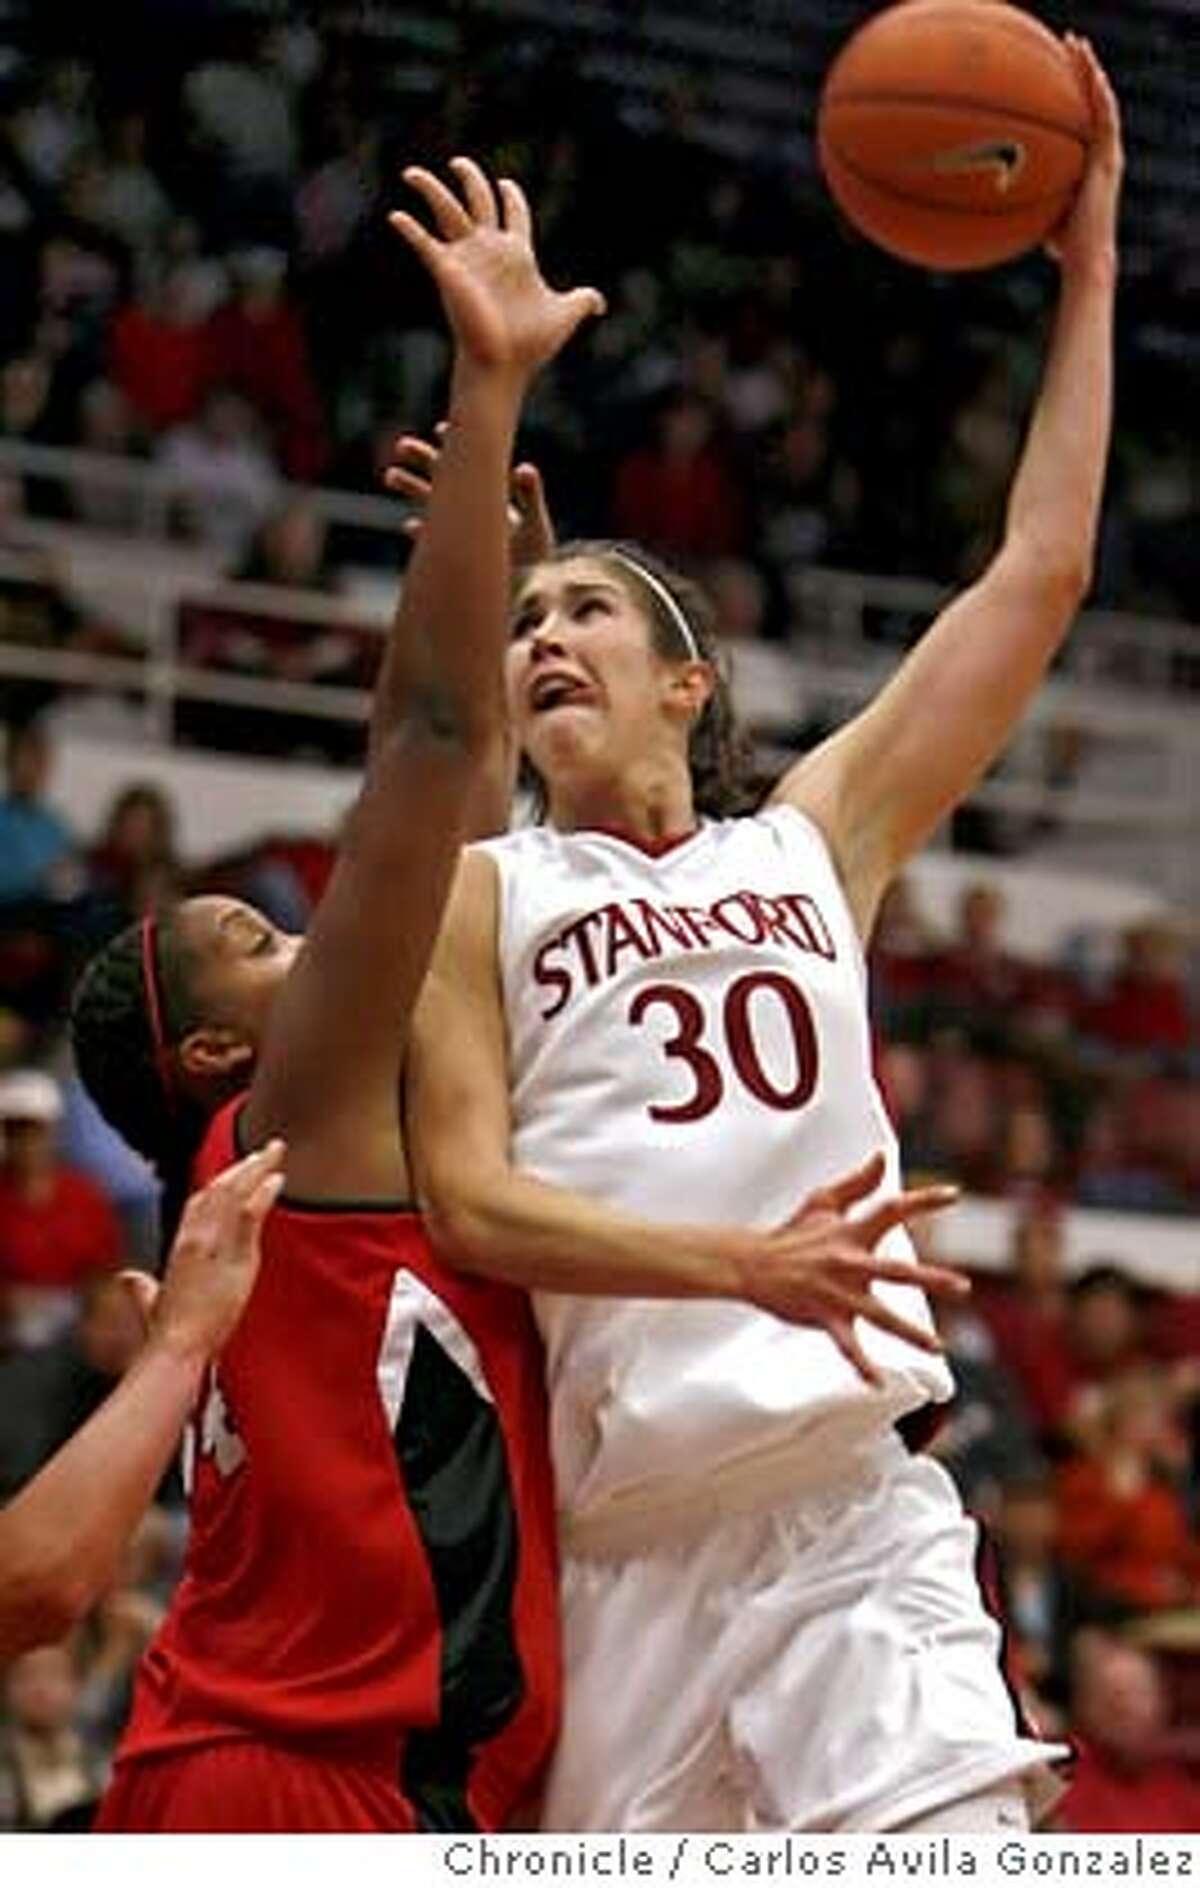 Stanford's Brooke Smith puts up a shot in the second half. The Stanford women's basketball team played Texas Tech at Maples Pavilion in Palo Alto, Ca., on Sunday, December 3, 2006. Stanford won the game, 73-49. Photo by Carlos Avila Gonzalez/The San Francisco Chronicle Photo taken on 12/3/06, in Palo Alto, Ca, USA. **All names cq (source)